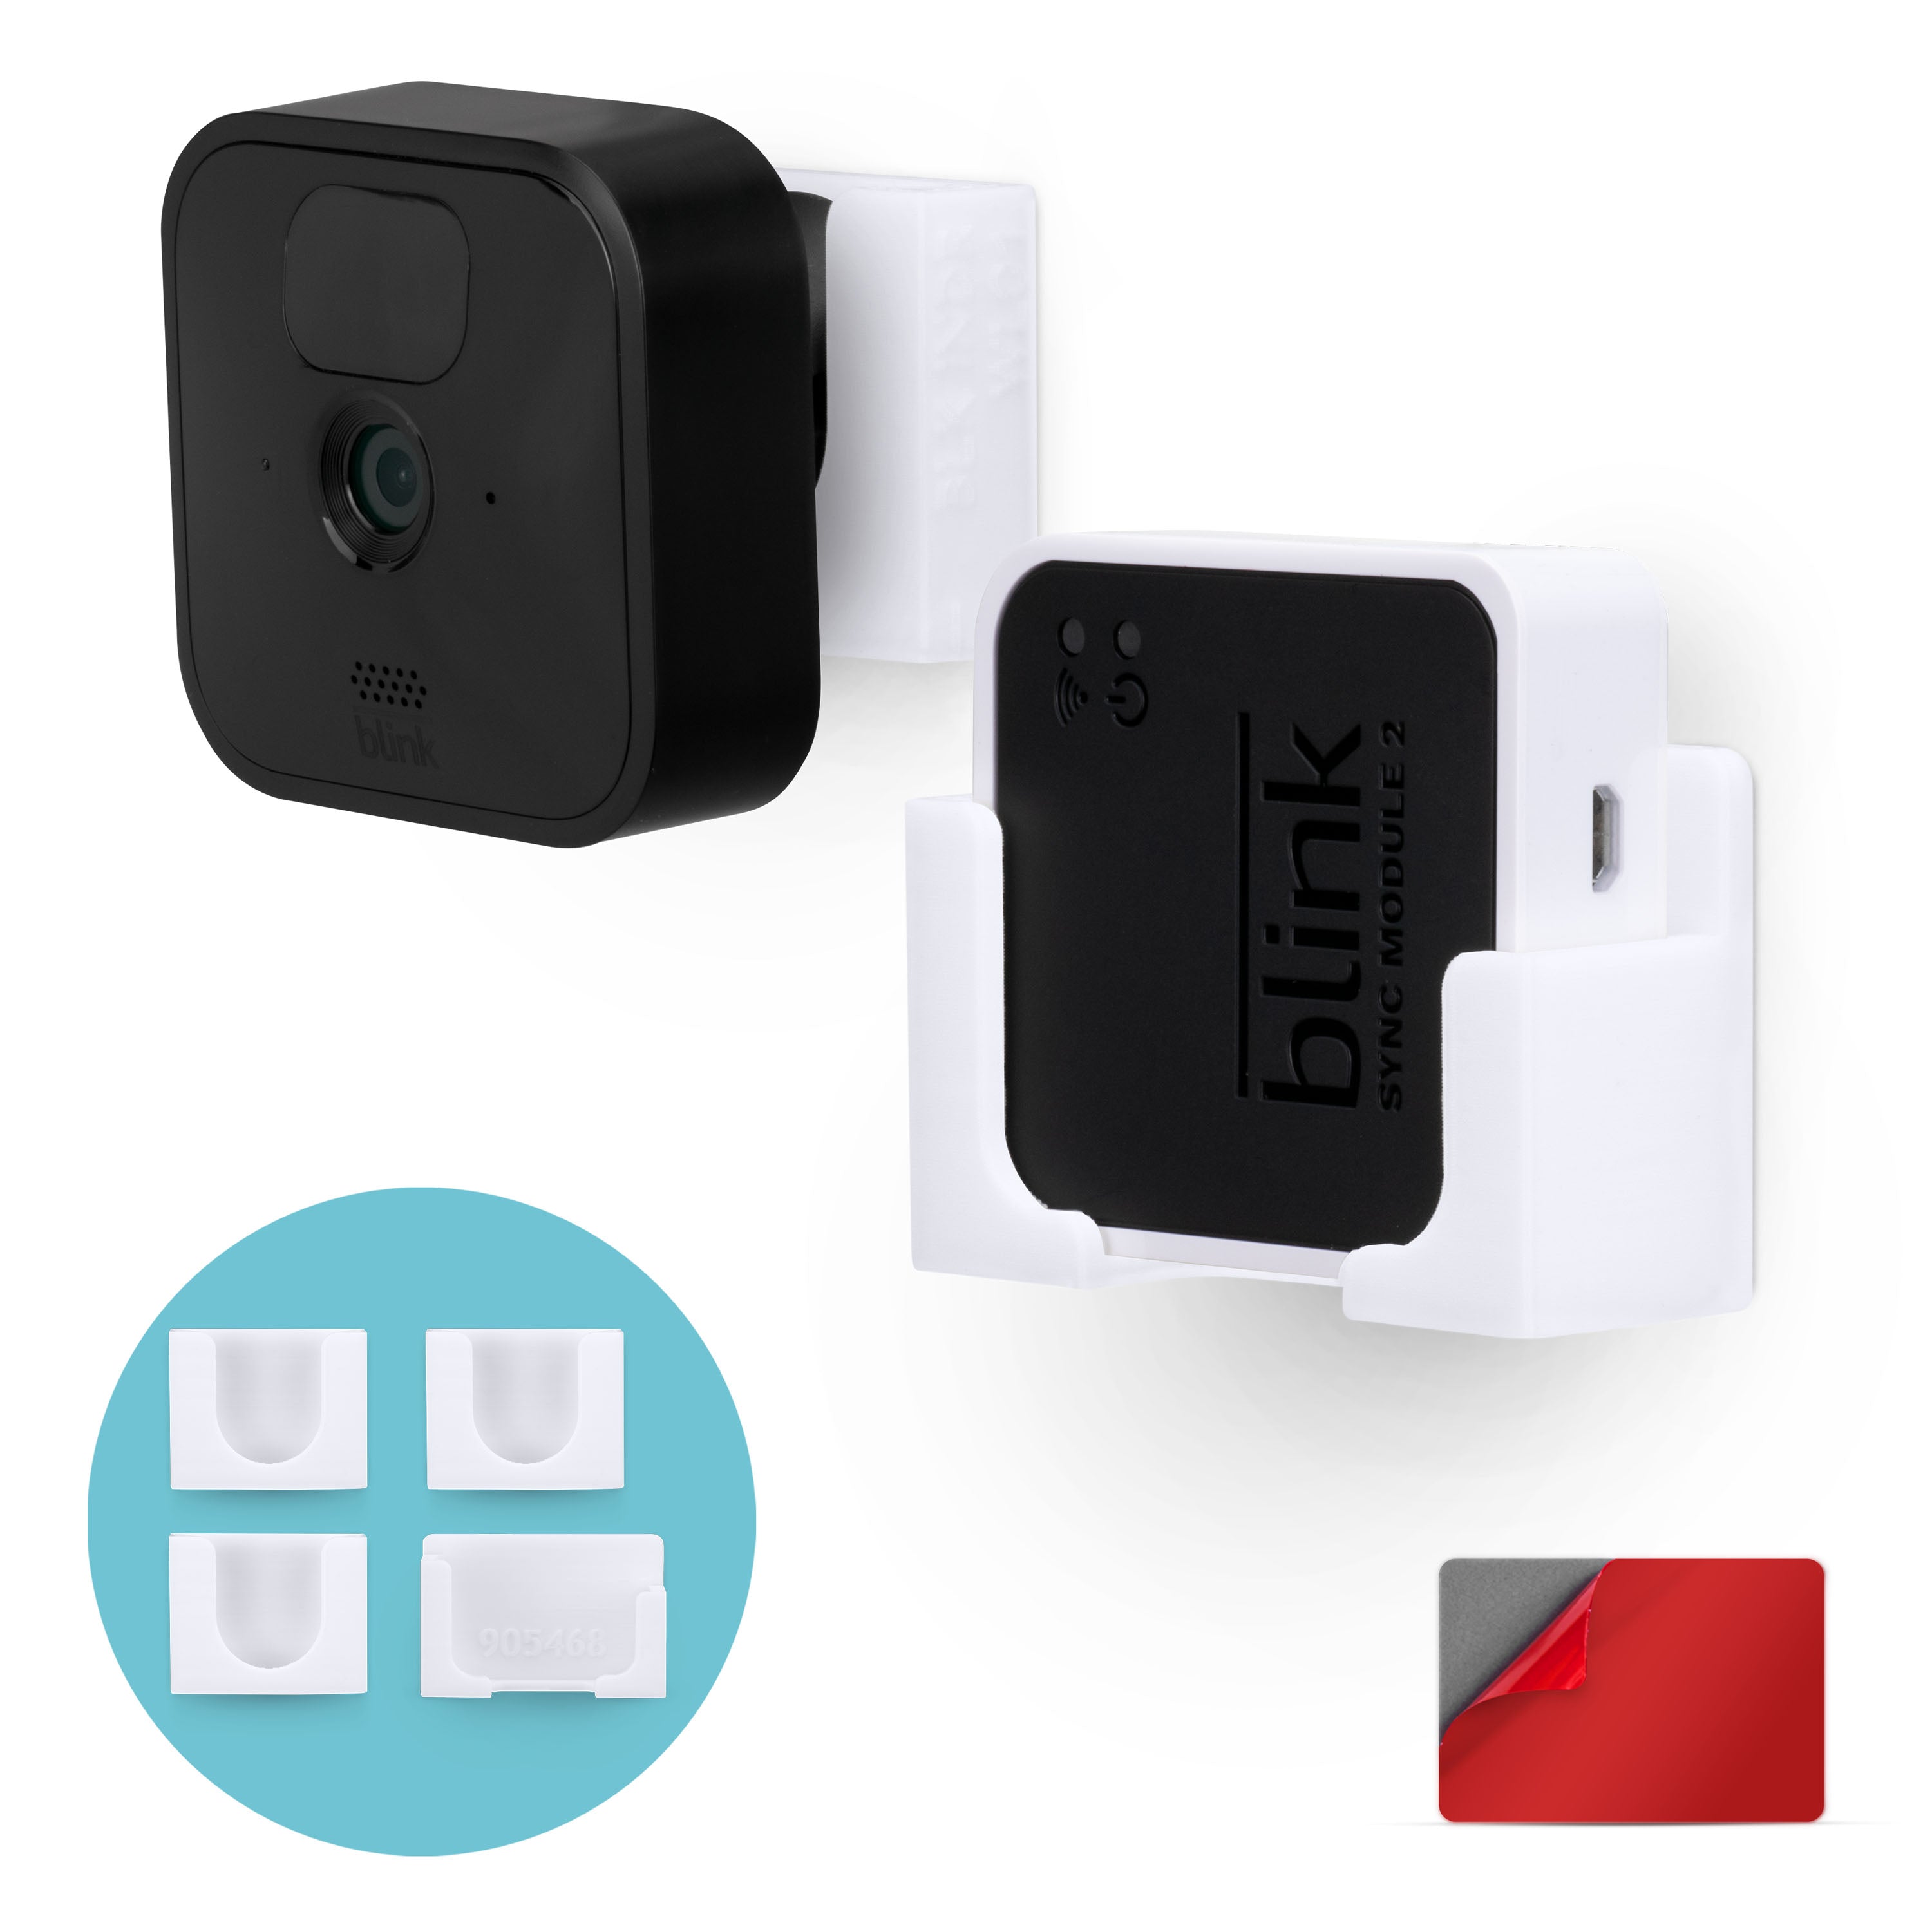 Blink Sync Module 2 for Blink Home Security Camera System